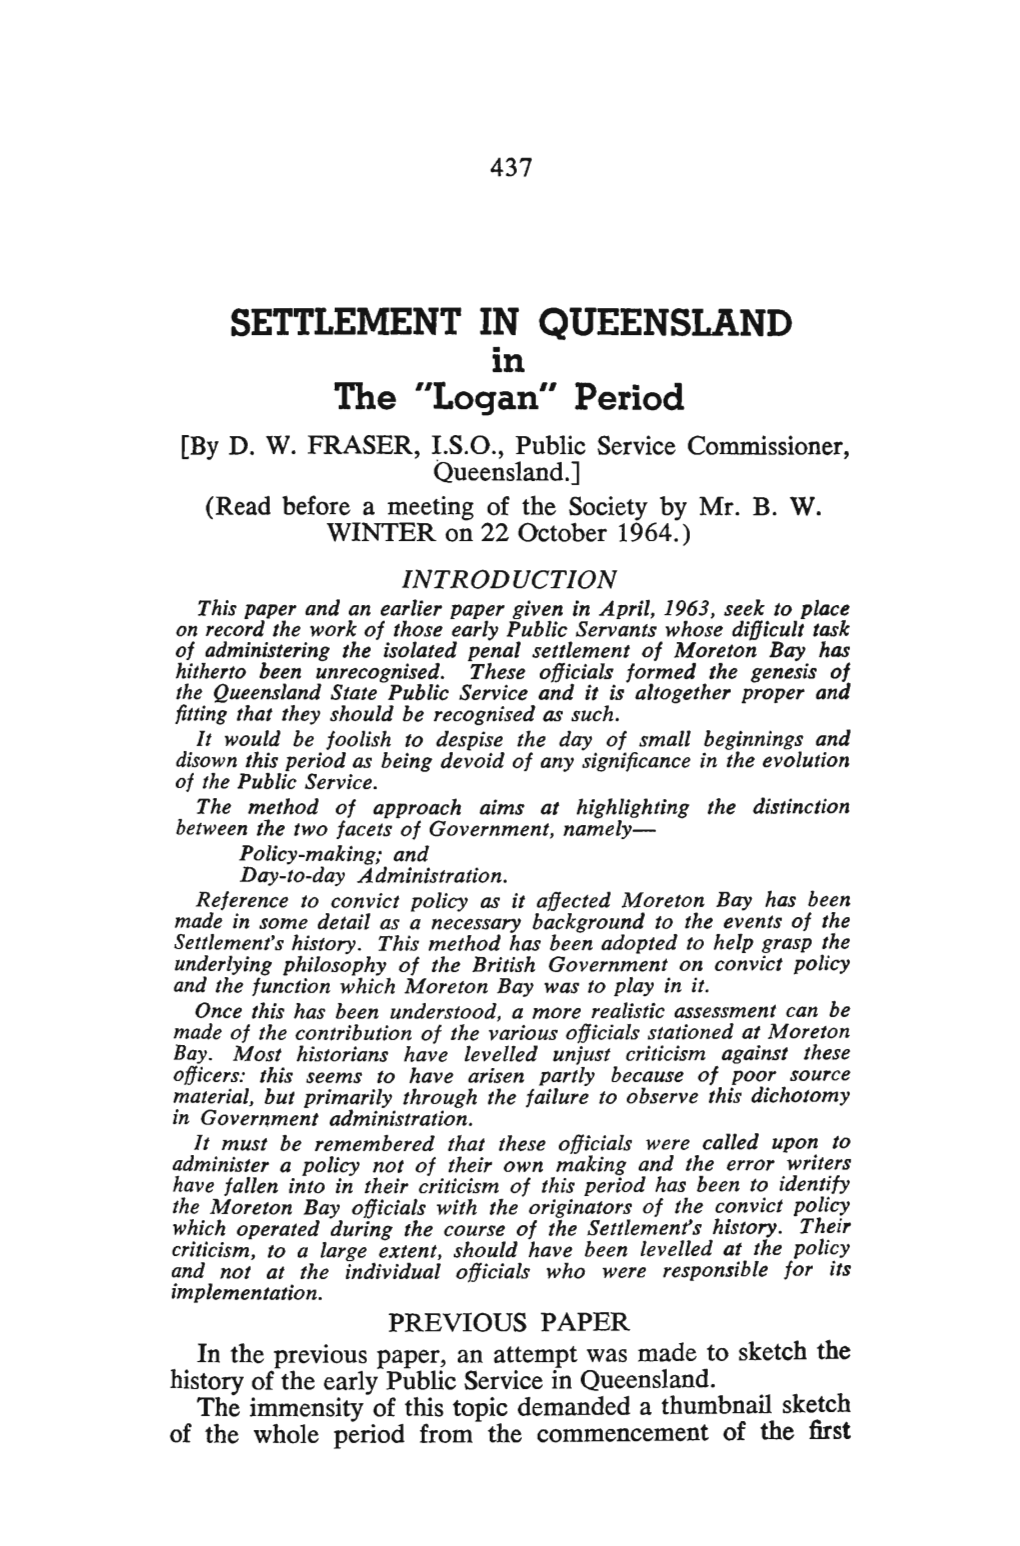 SETTLEMENT in QUEENSLAND in the "Logan" Period [By D